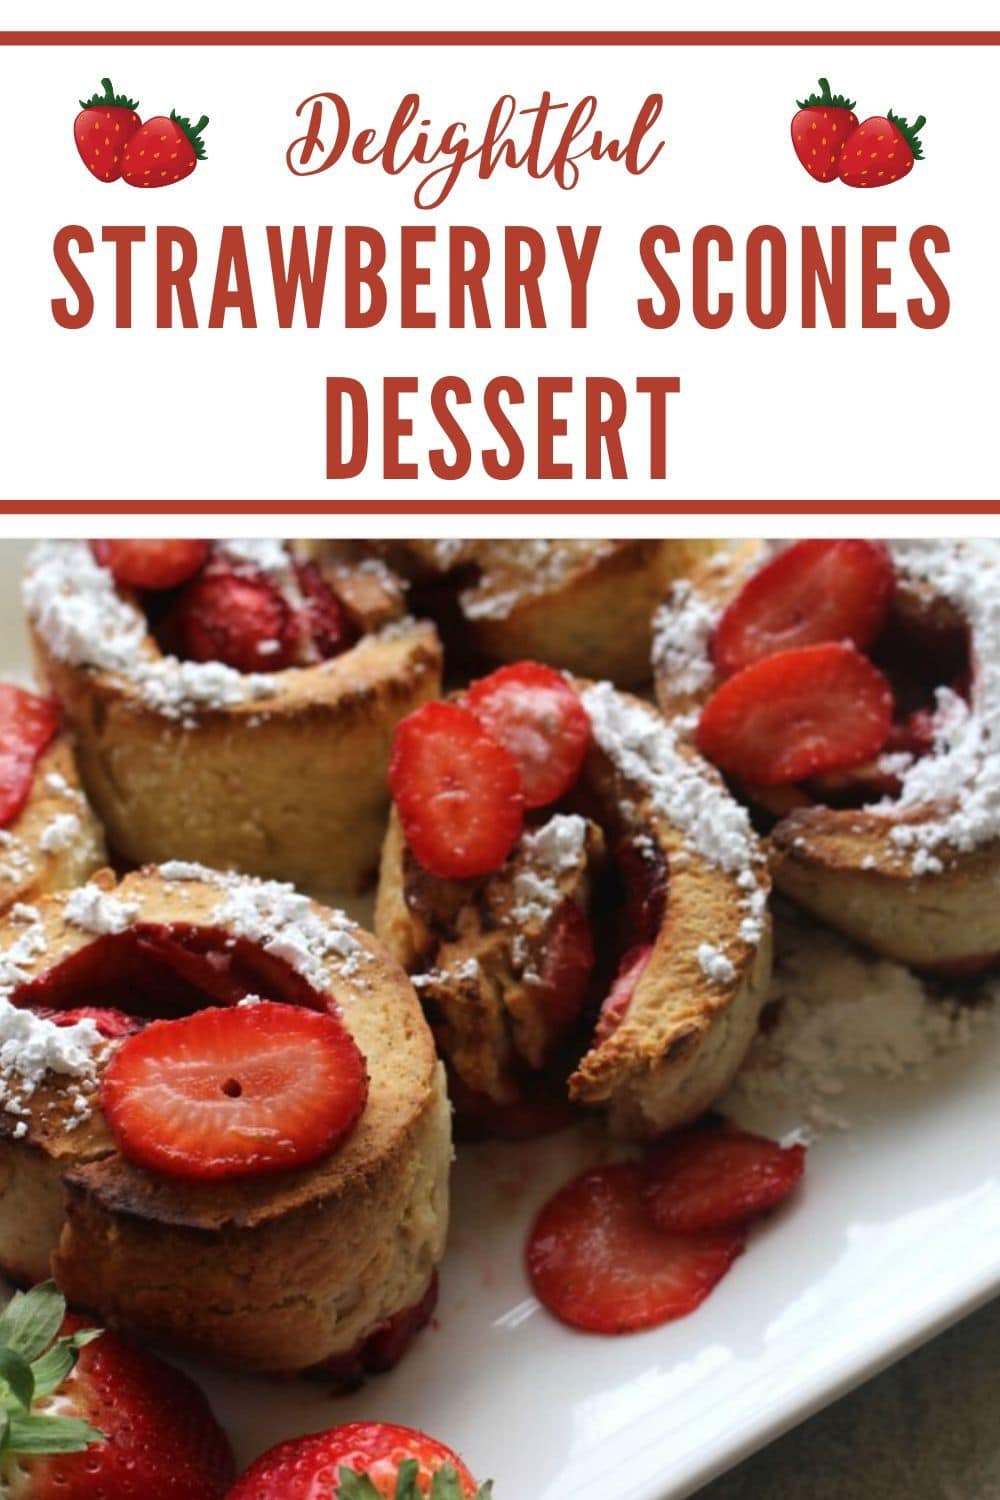 rolled up scones topped with strawberries and powdered sugar